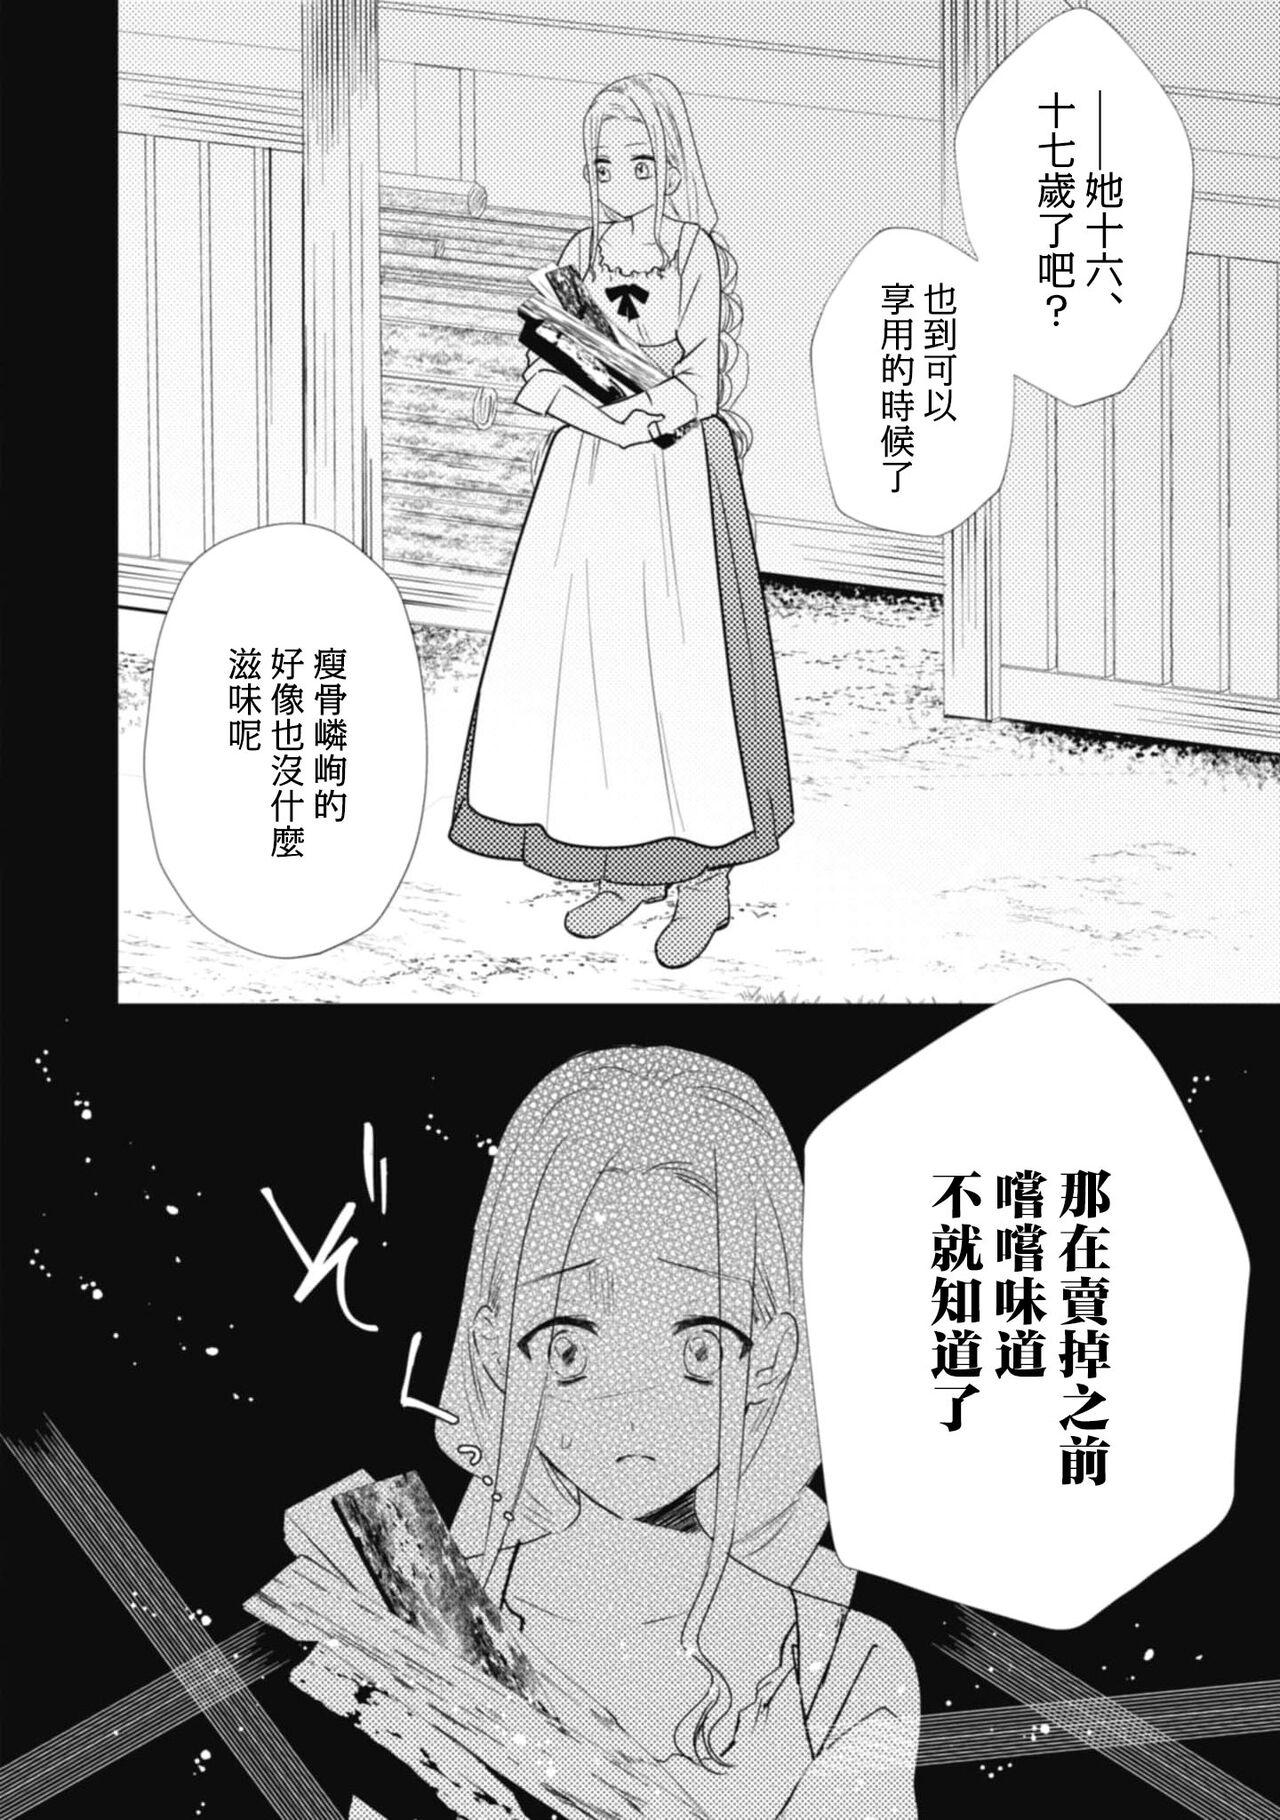 A shepherd in love with a demoted knight | 与被贬骑士相爱的牧羊女1 15